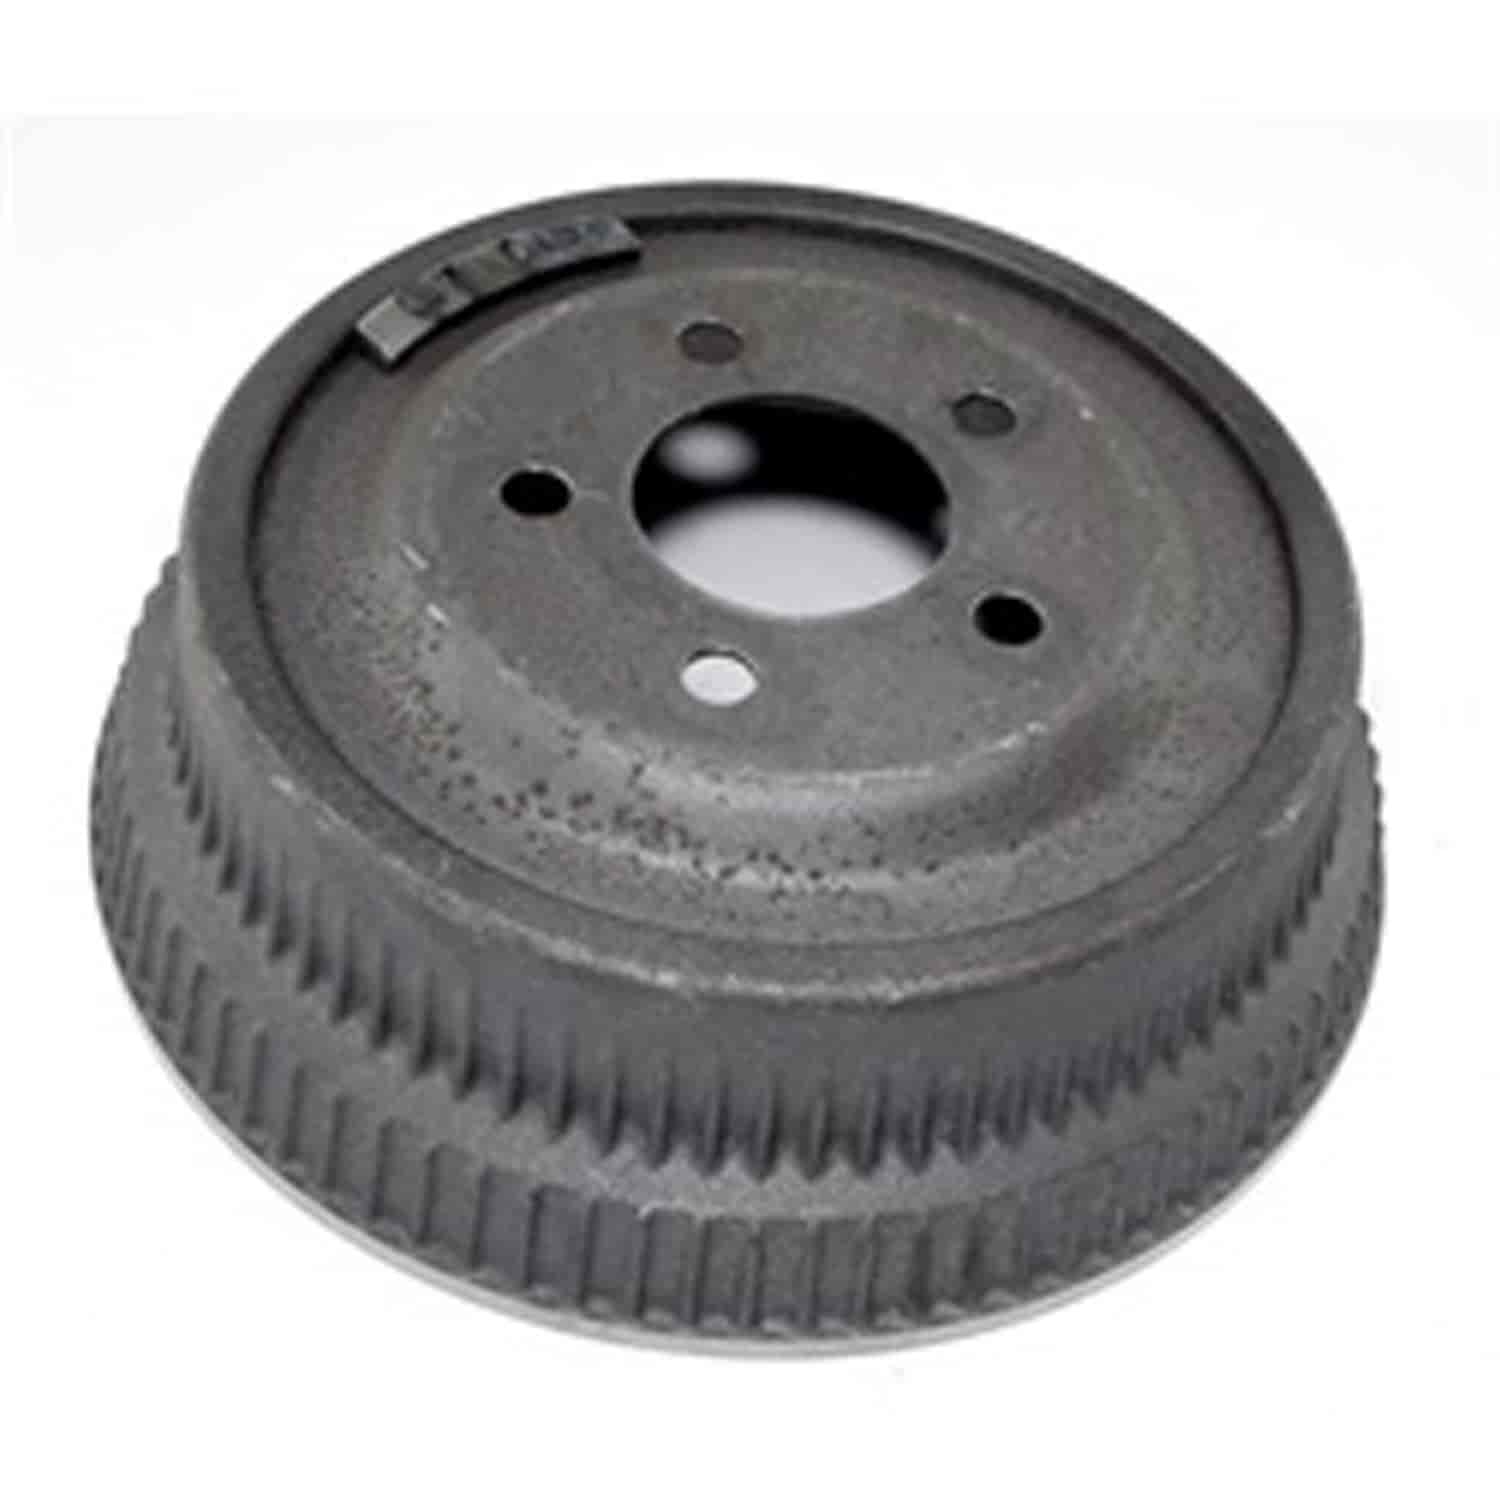 Replacement rear brake drum from Omix-ADA, Fits 07-10 Jeep Compass and Patriots. Sold individual